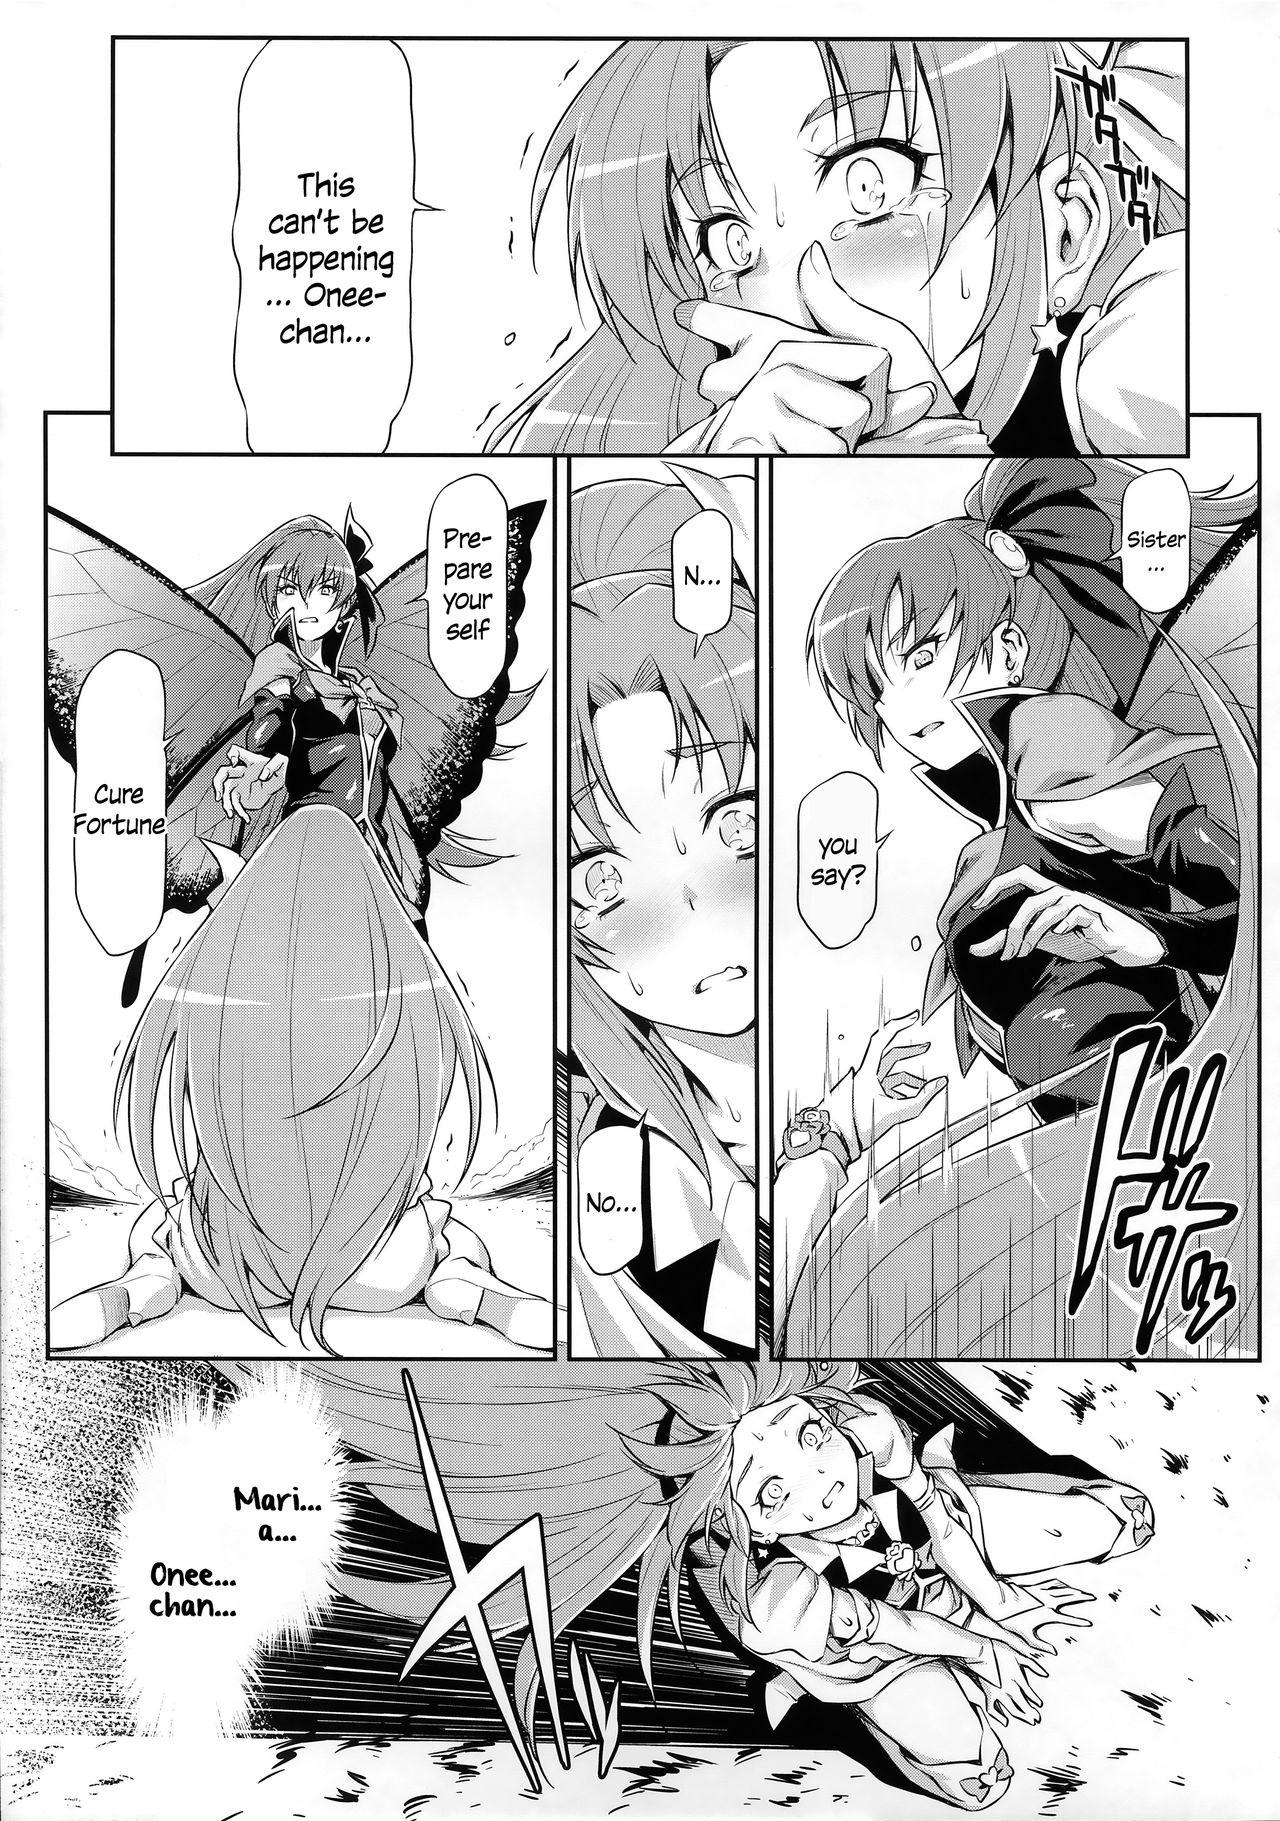 Chacal Butterfly and Chrysalis - Happinesscharge precure Str8 - Page 8